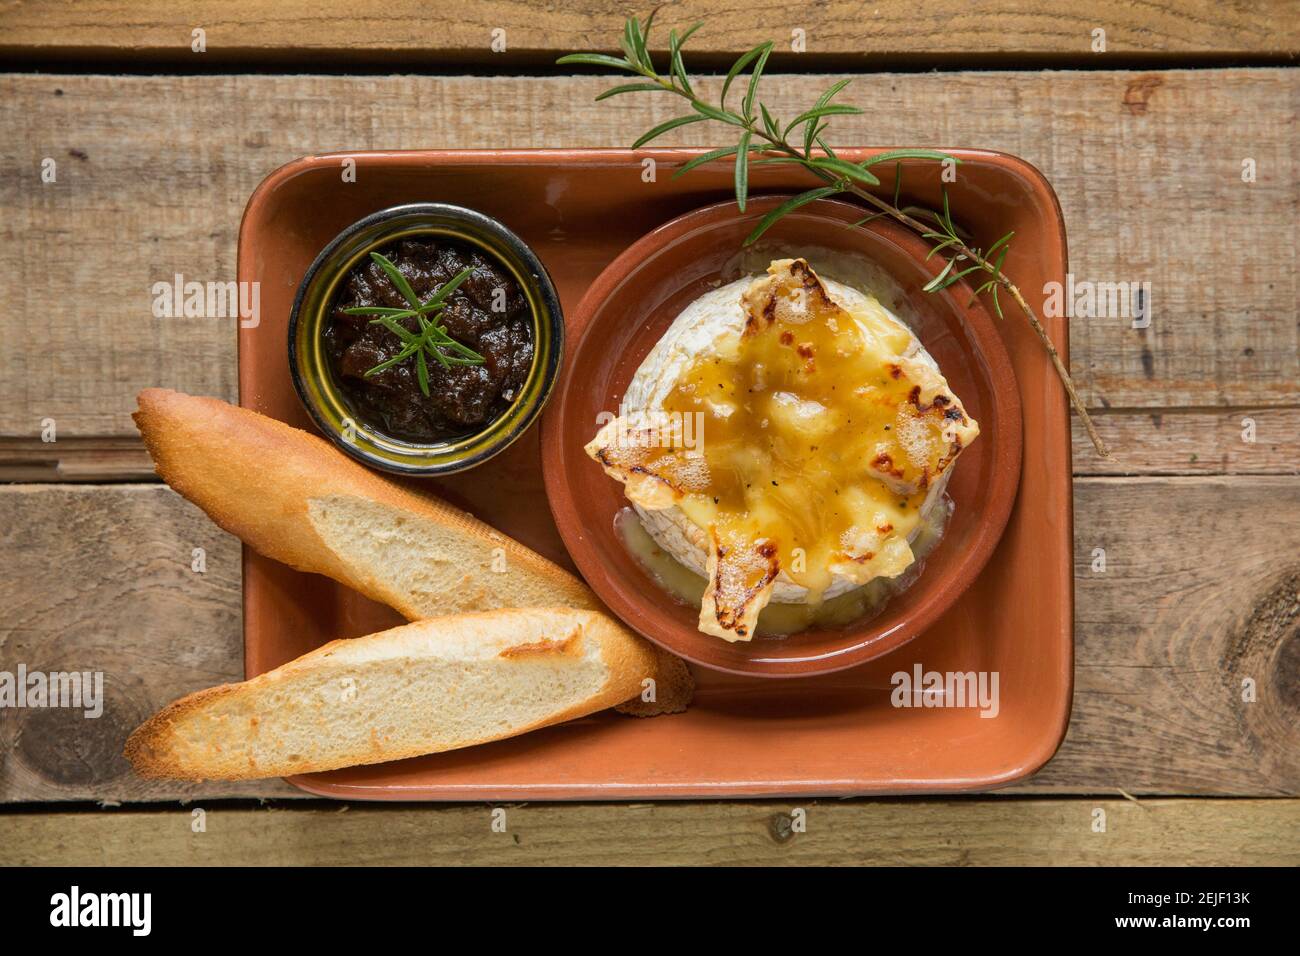 French Camembert that has been baked in an oven with a truffle, garlic and honey sauce, served with toasted French bread and caramelised onion chutney Stock Photo